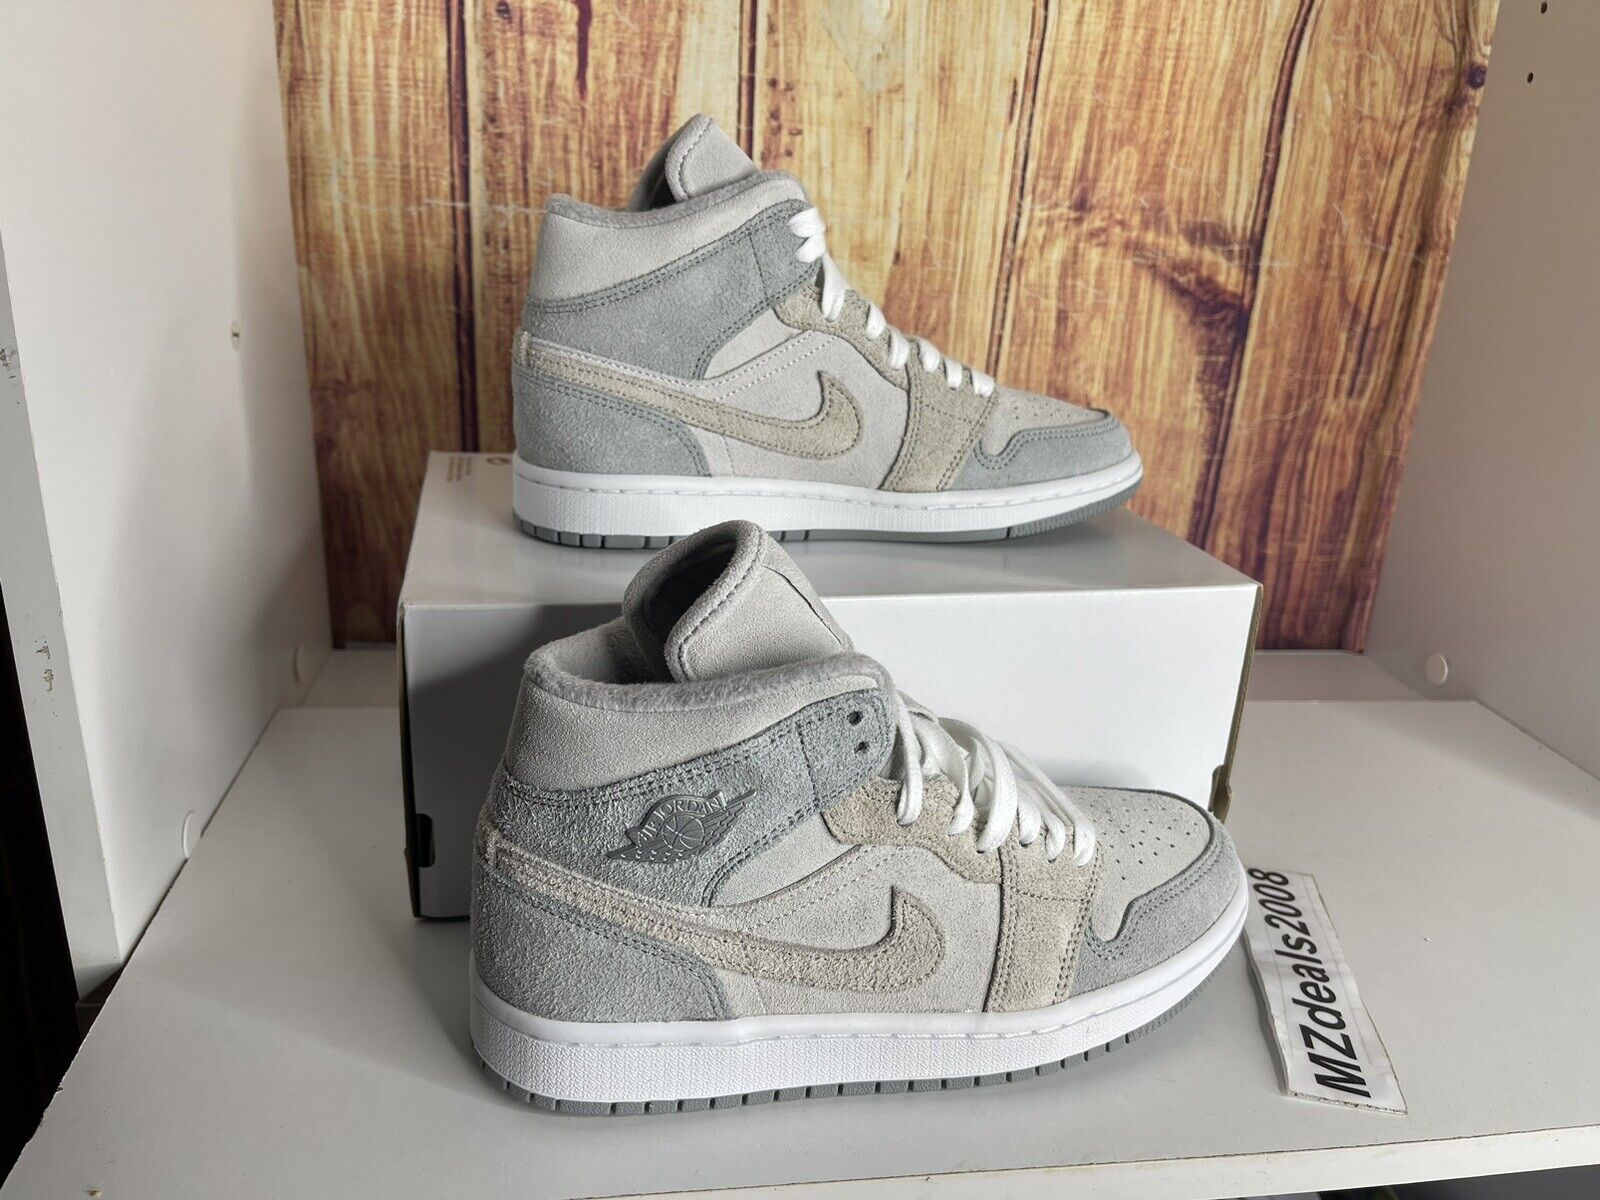 Nike Air Jordan 1 Mid Particle Grey size 7 Suede Womens Retro NEW